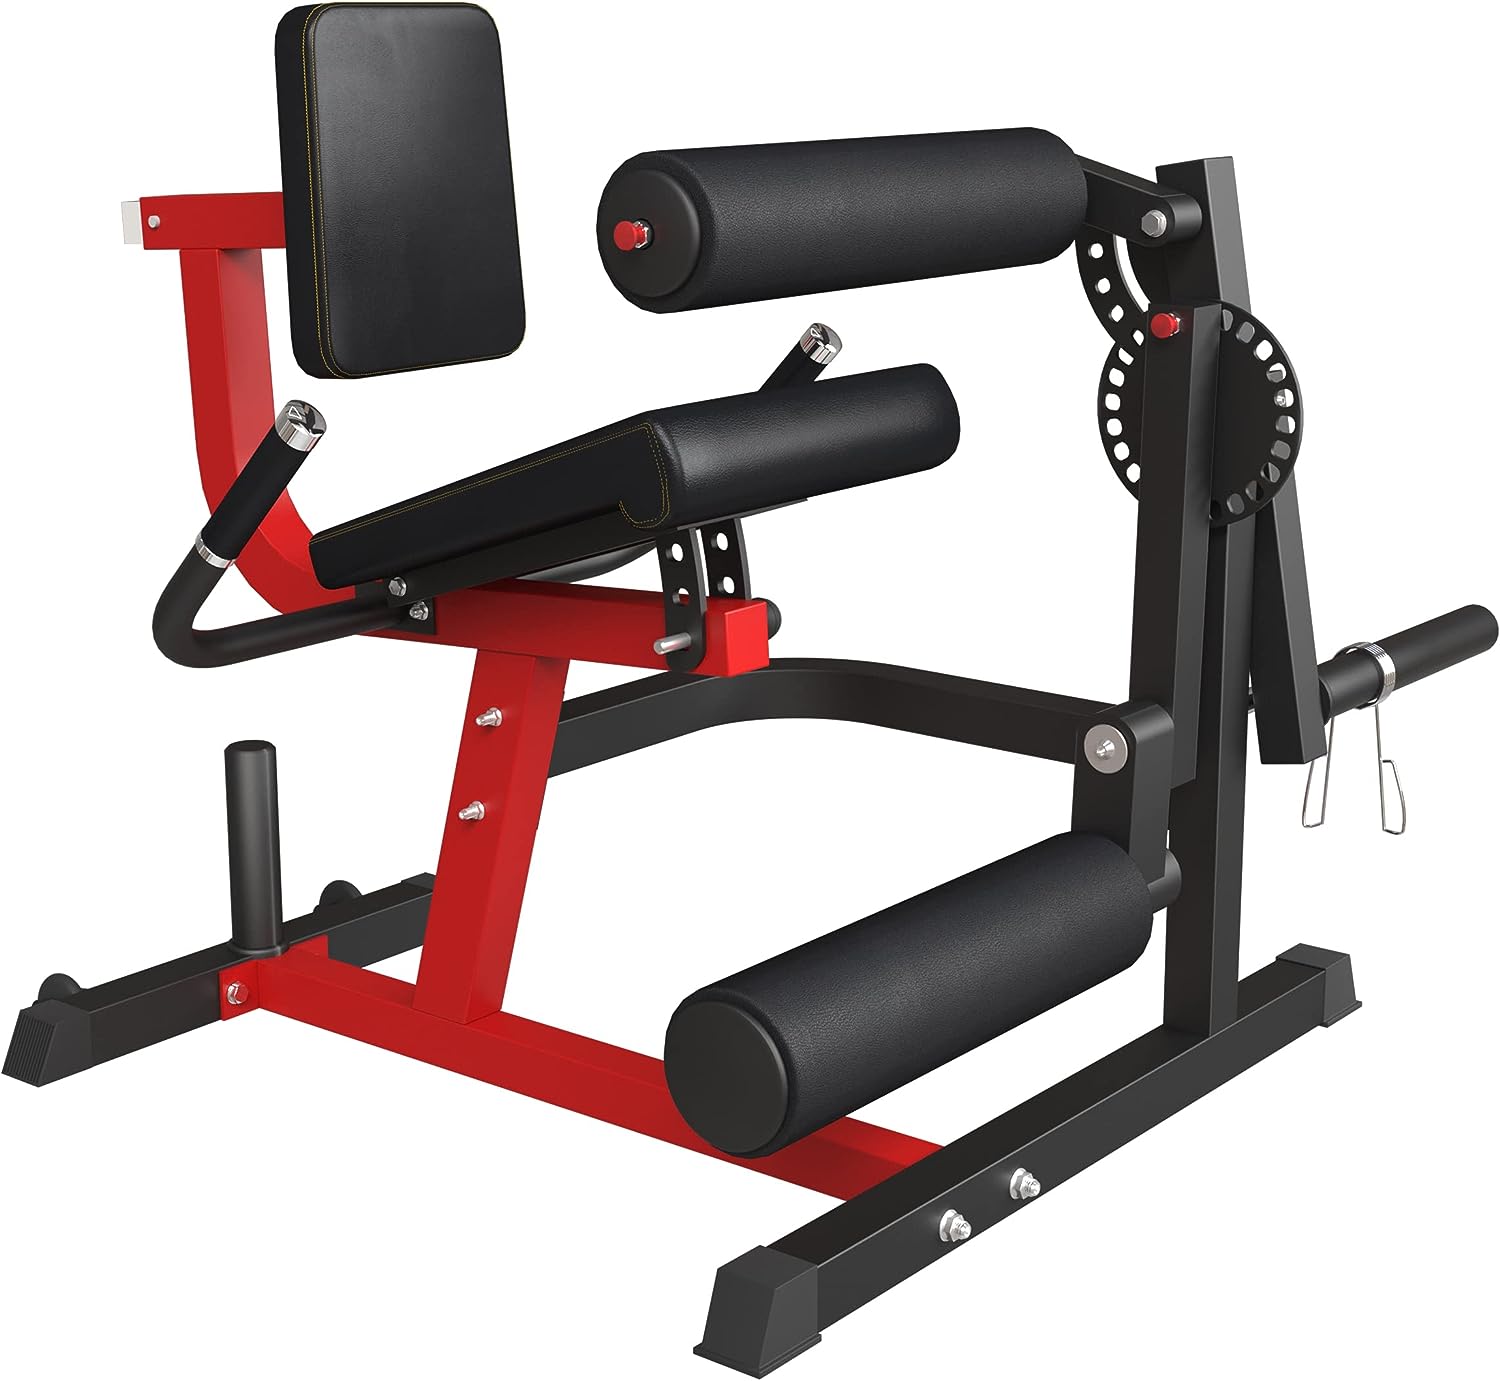 GMWD Leg Extension Machine and Curl, Lower Body Special Leg Machine, Adjustable Leg Exercise Bench